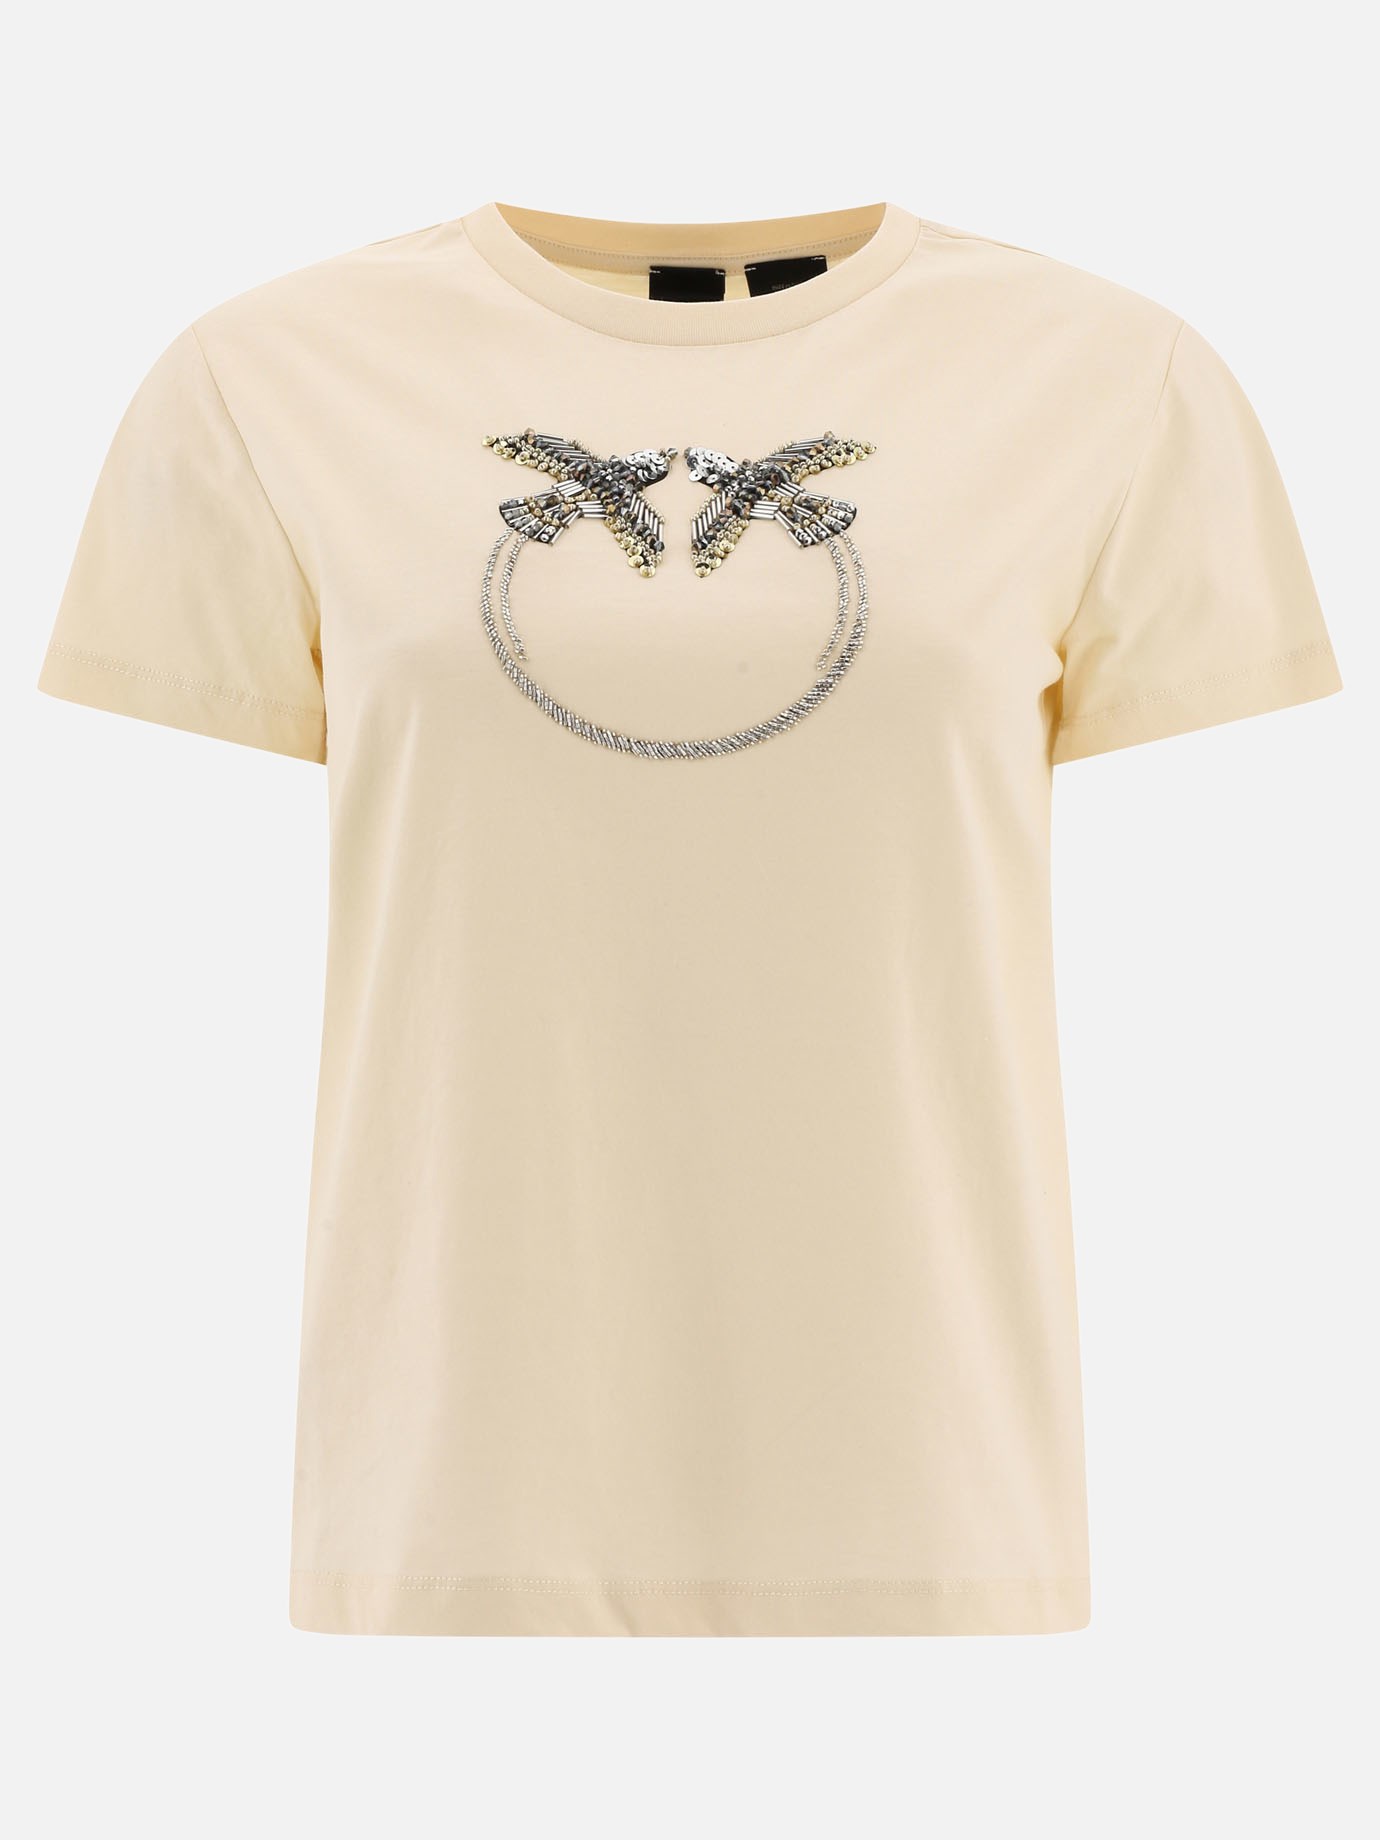 T-shirt  Quentin  by Pinko